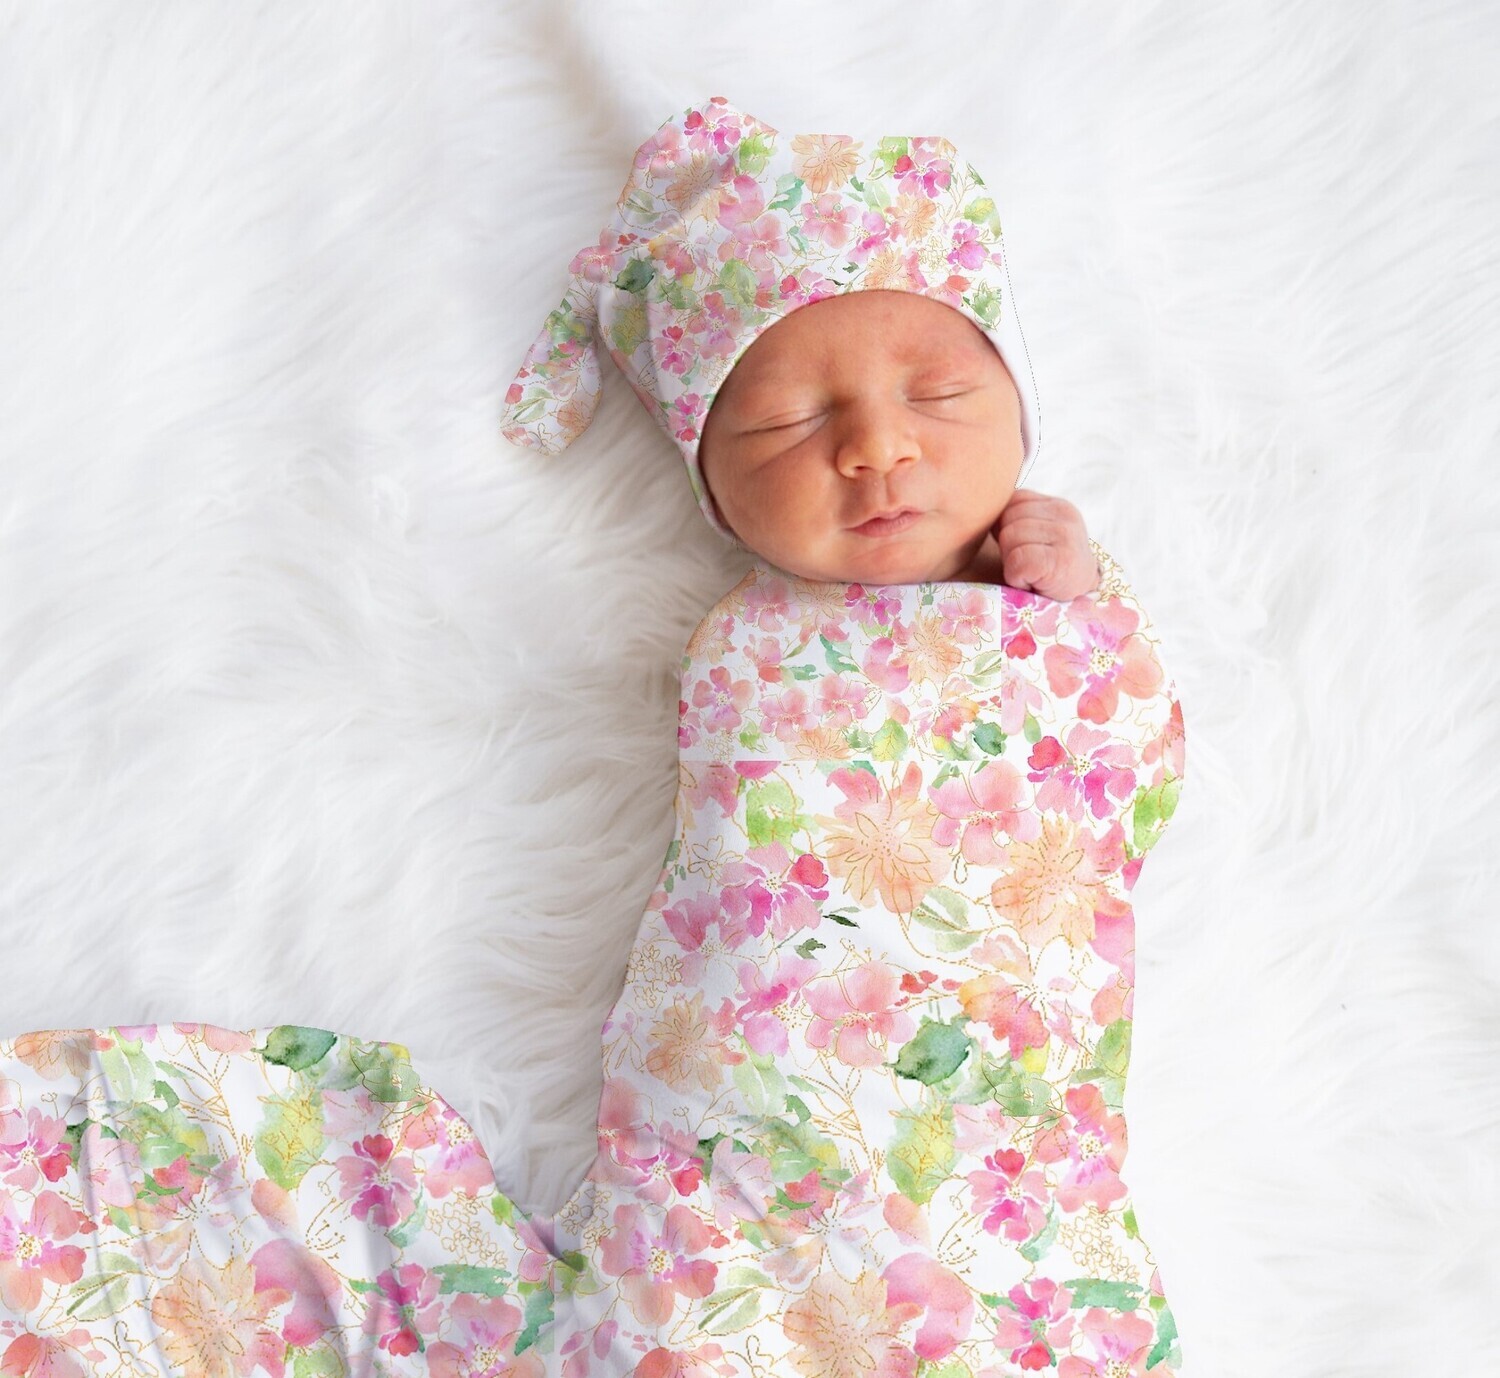 Floral Baby Girl Swaddle Blanket Newborn Swaddle Blanket Knotted Baby Cap Headband Baby Gift Hospital Photo Newborn Photo Newborn Blanket